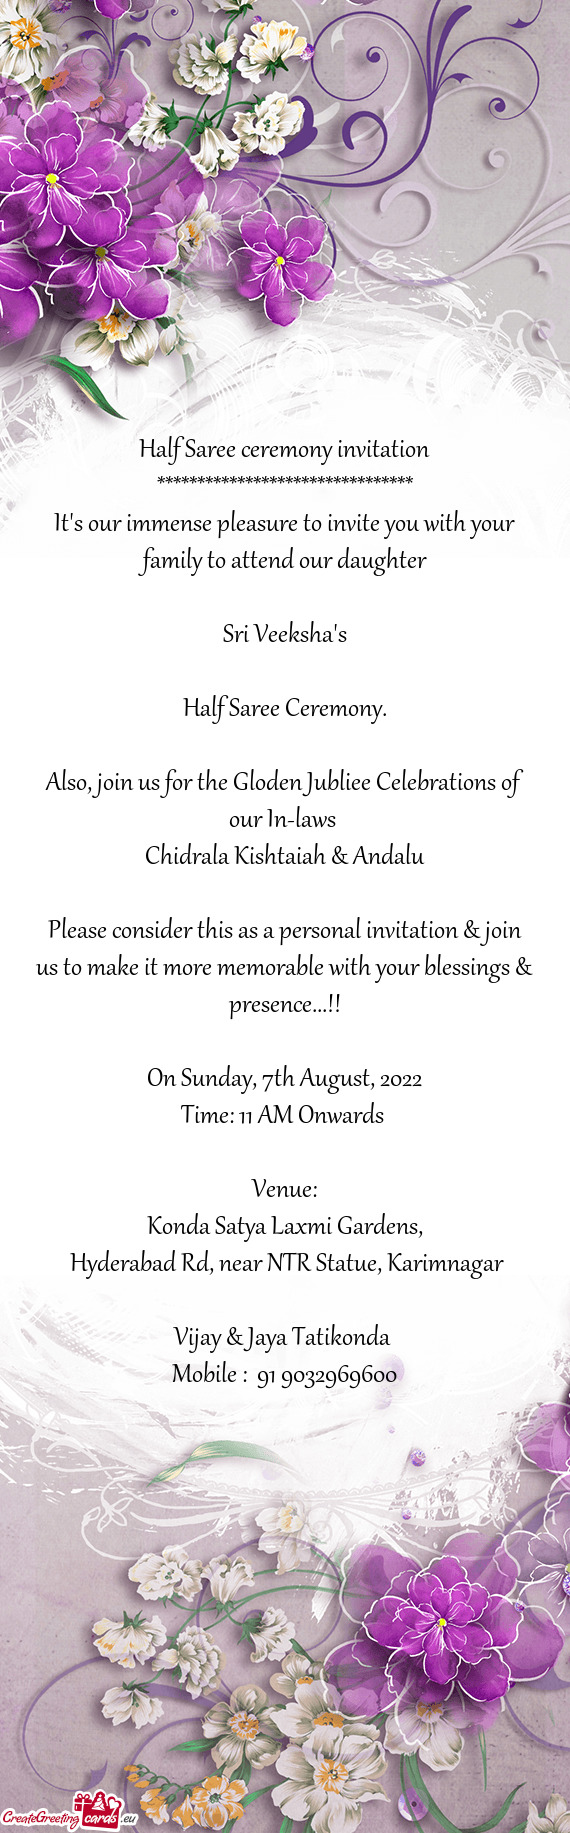 Please consider this as a personal invitation & join us to make it more memorable with your blessing